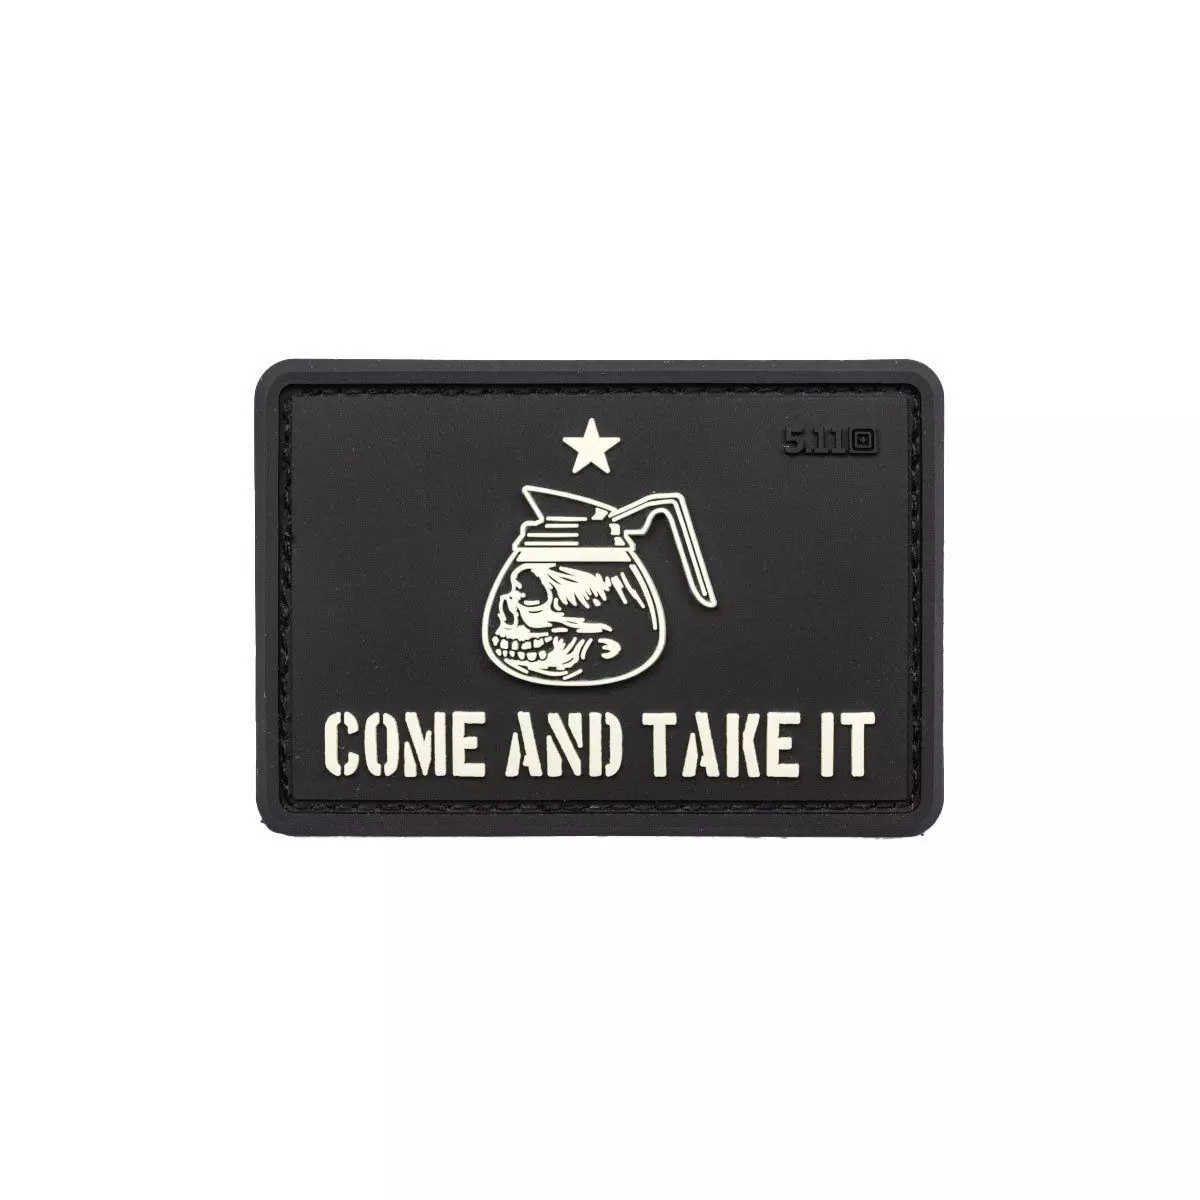 Moral Patch auto-agrippant tactique Come and Take it - 5.11 Tactical